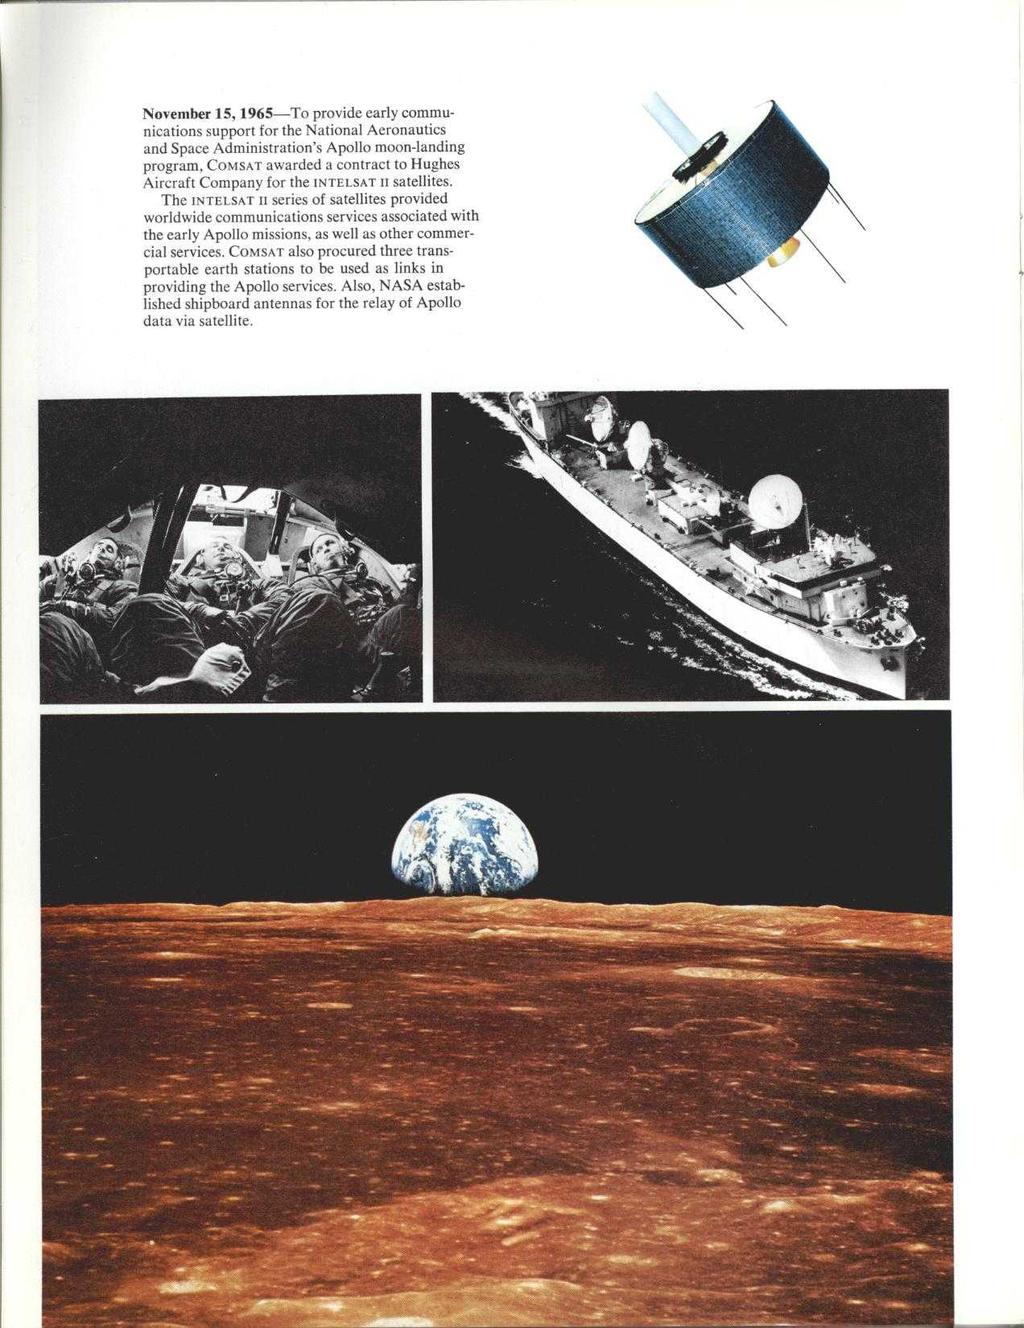 November 15, 1965-To provide early communications support for the National Aeronautics and Space Administration's Apollo moon-landing program, COMSAT awarded a contract to Hughes Aircraft Company for